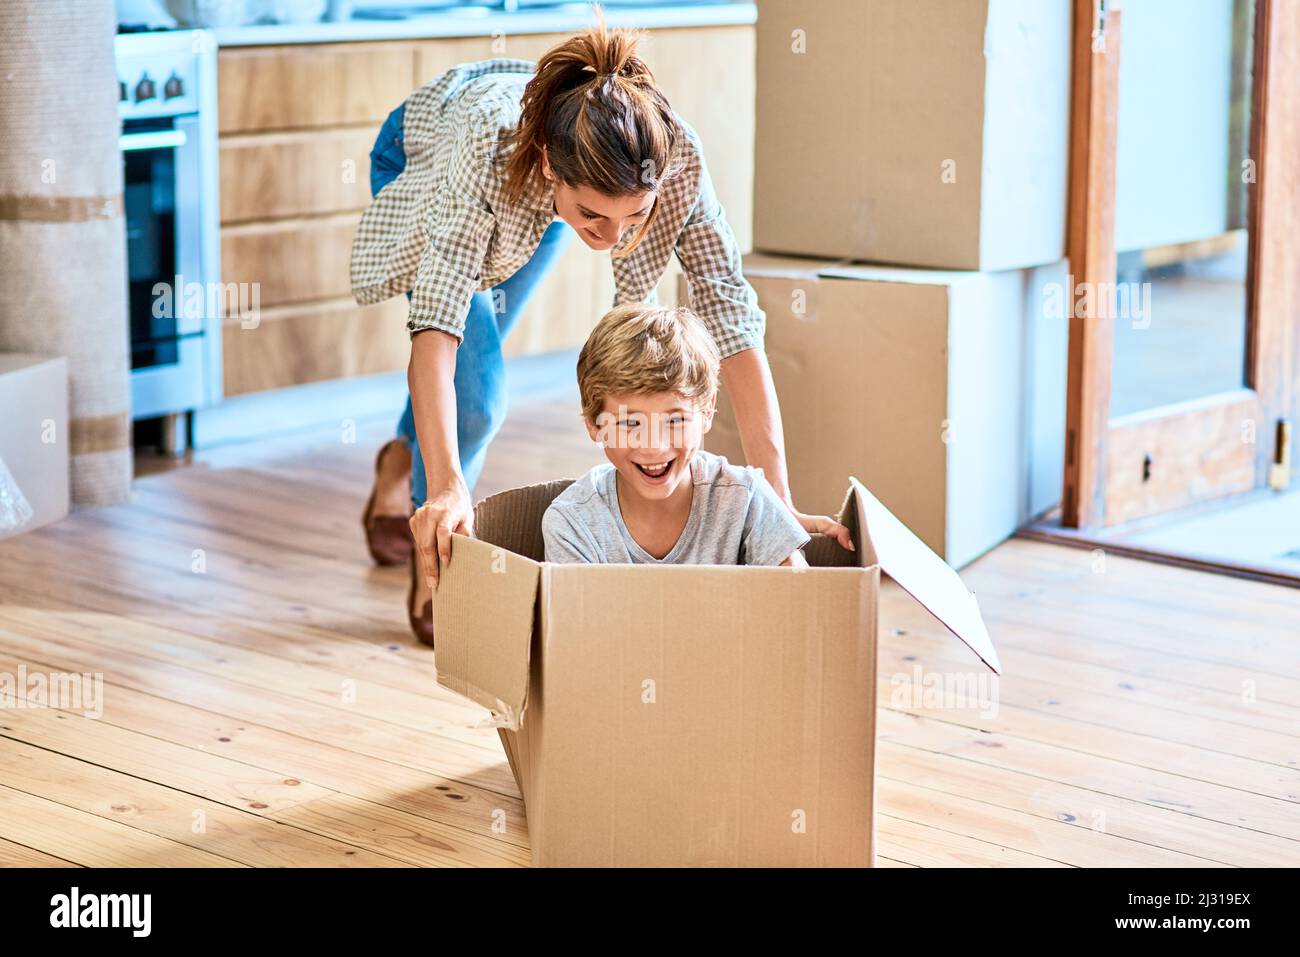 We have liftoff. Shot of a cheerful young woman pushing her son around in a box imagining its a car inside at home during the day. Stock Photo